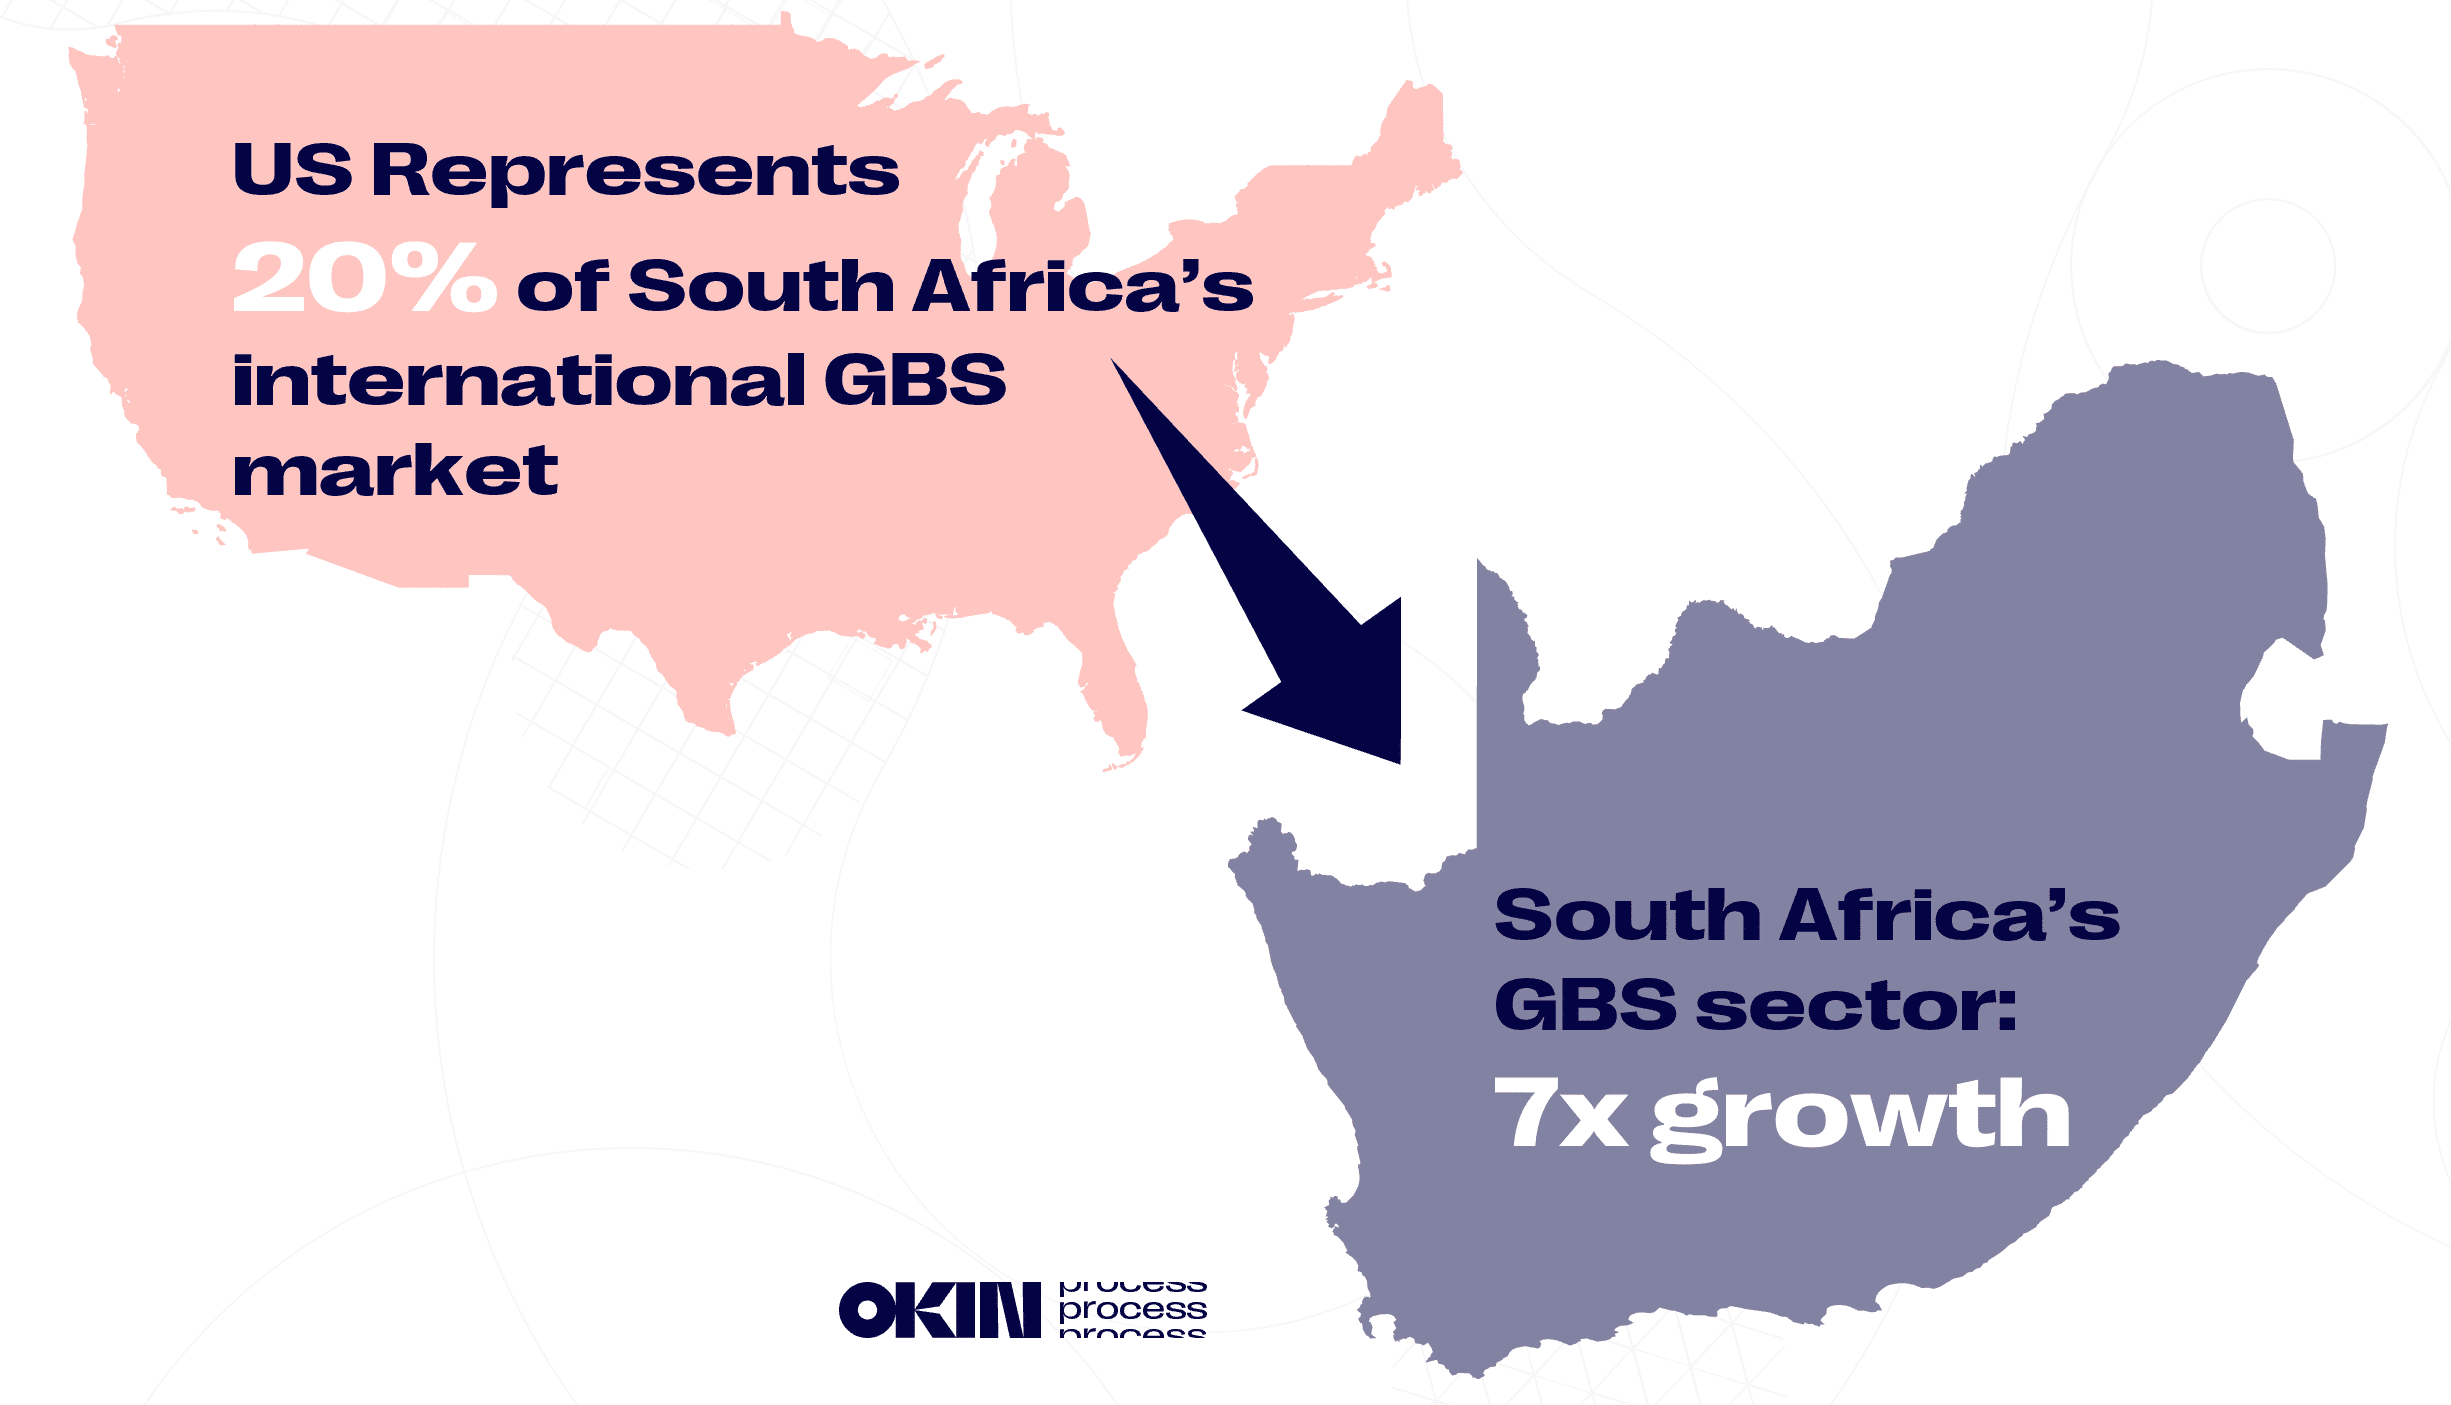 US represents 20% of South Africa's internal GBS market. South Africa's GBS sector: 7x Growth